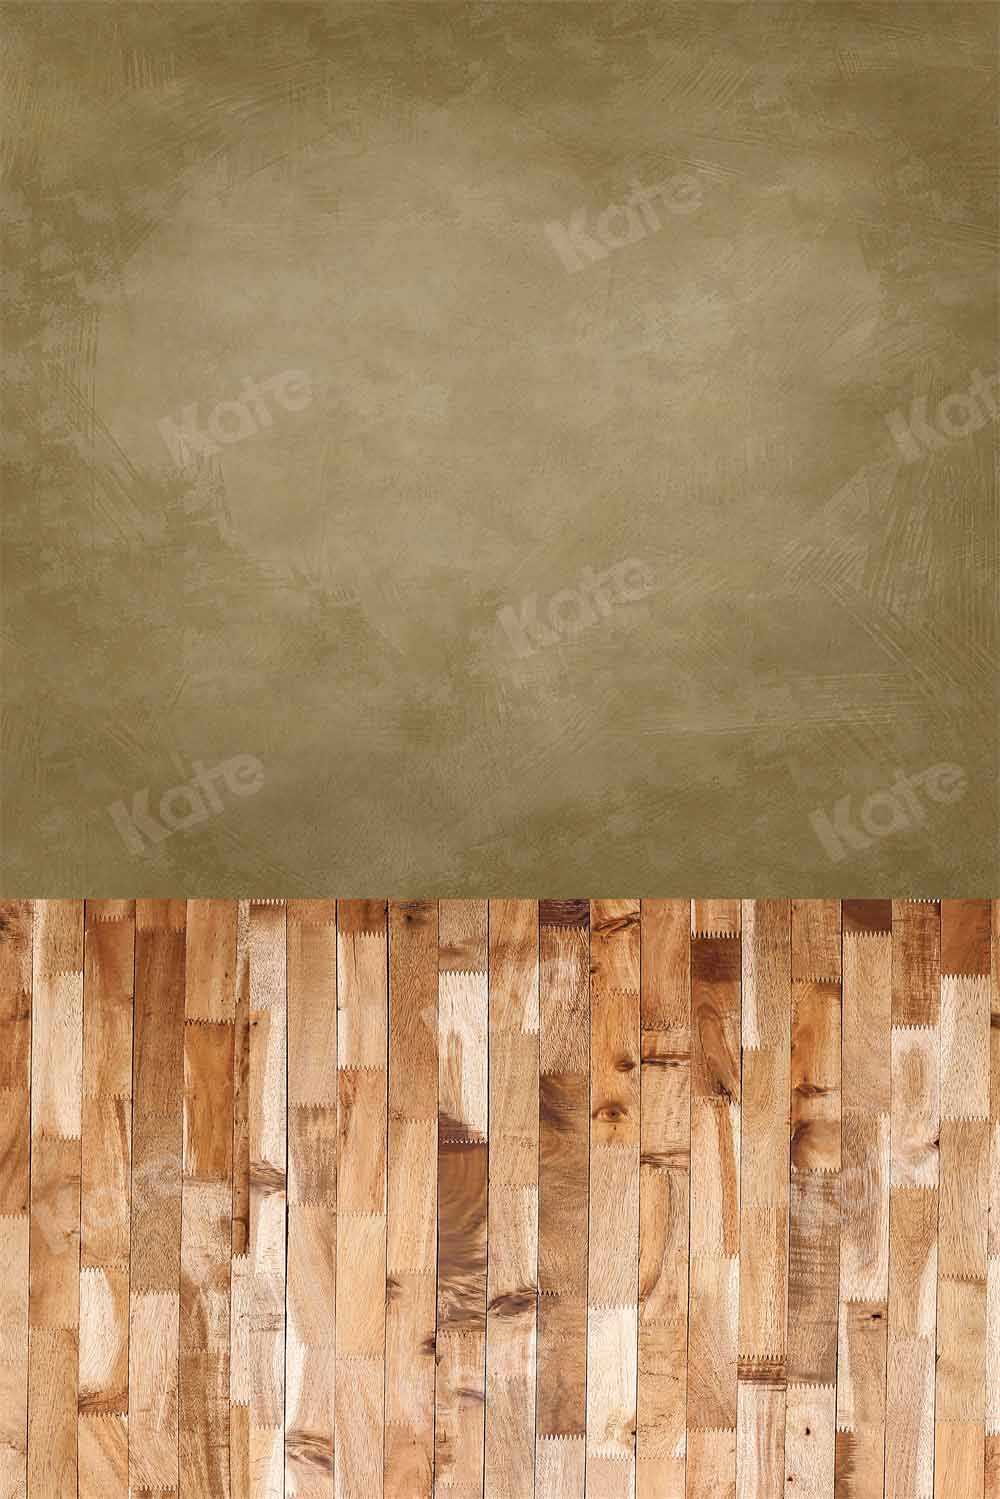 Kate Abstract Wooden Board Backdrop Stitching Designed by Chain Photography